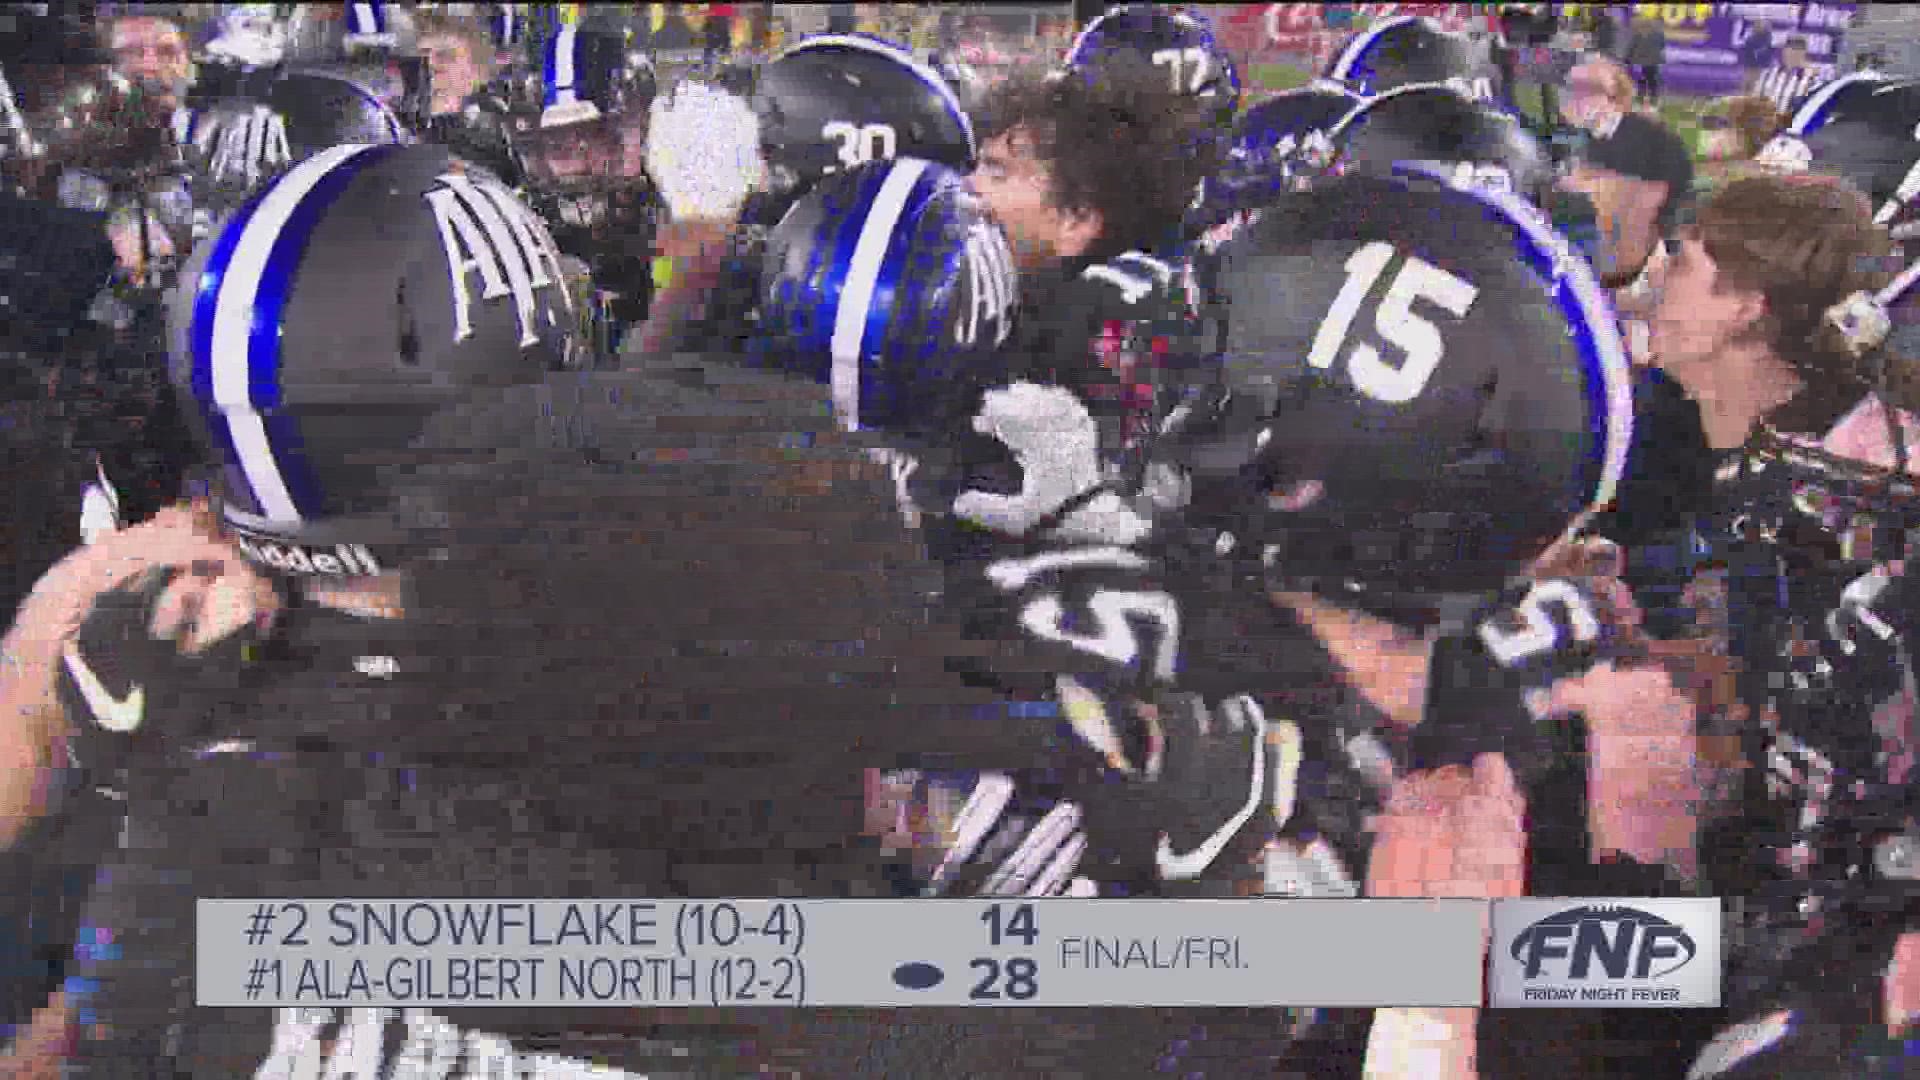 Gilbert North wins the first state title in program history with a win over Snowflake.